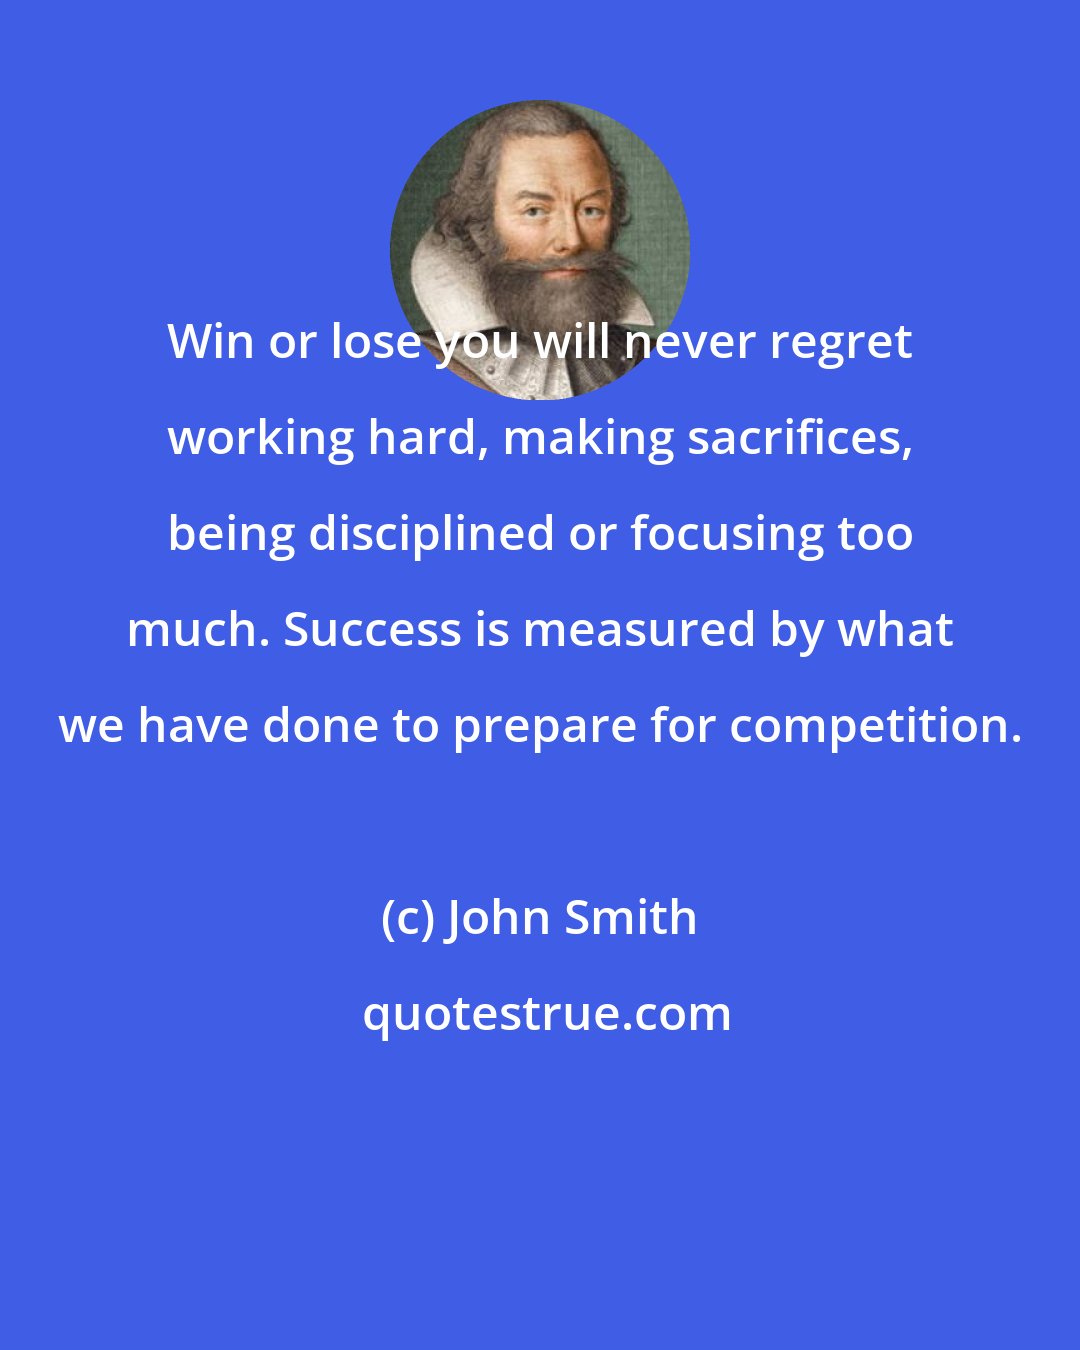 John Smith: Win or lose you will never regret working hard, making sacrifices, being disciplined or focusing too much. Success is measured by what we have done to prepare for competition.